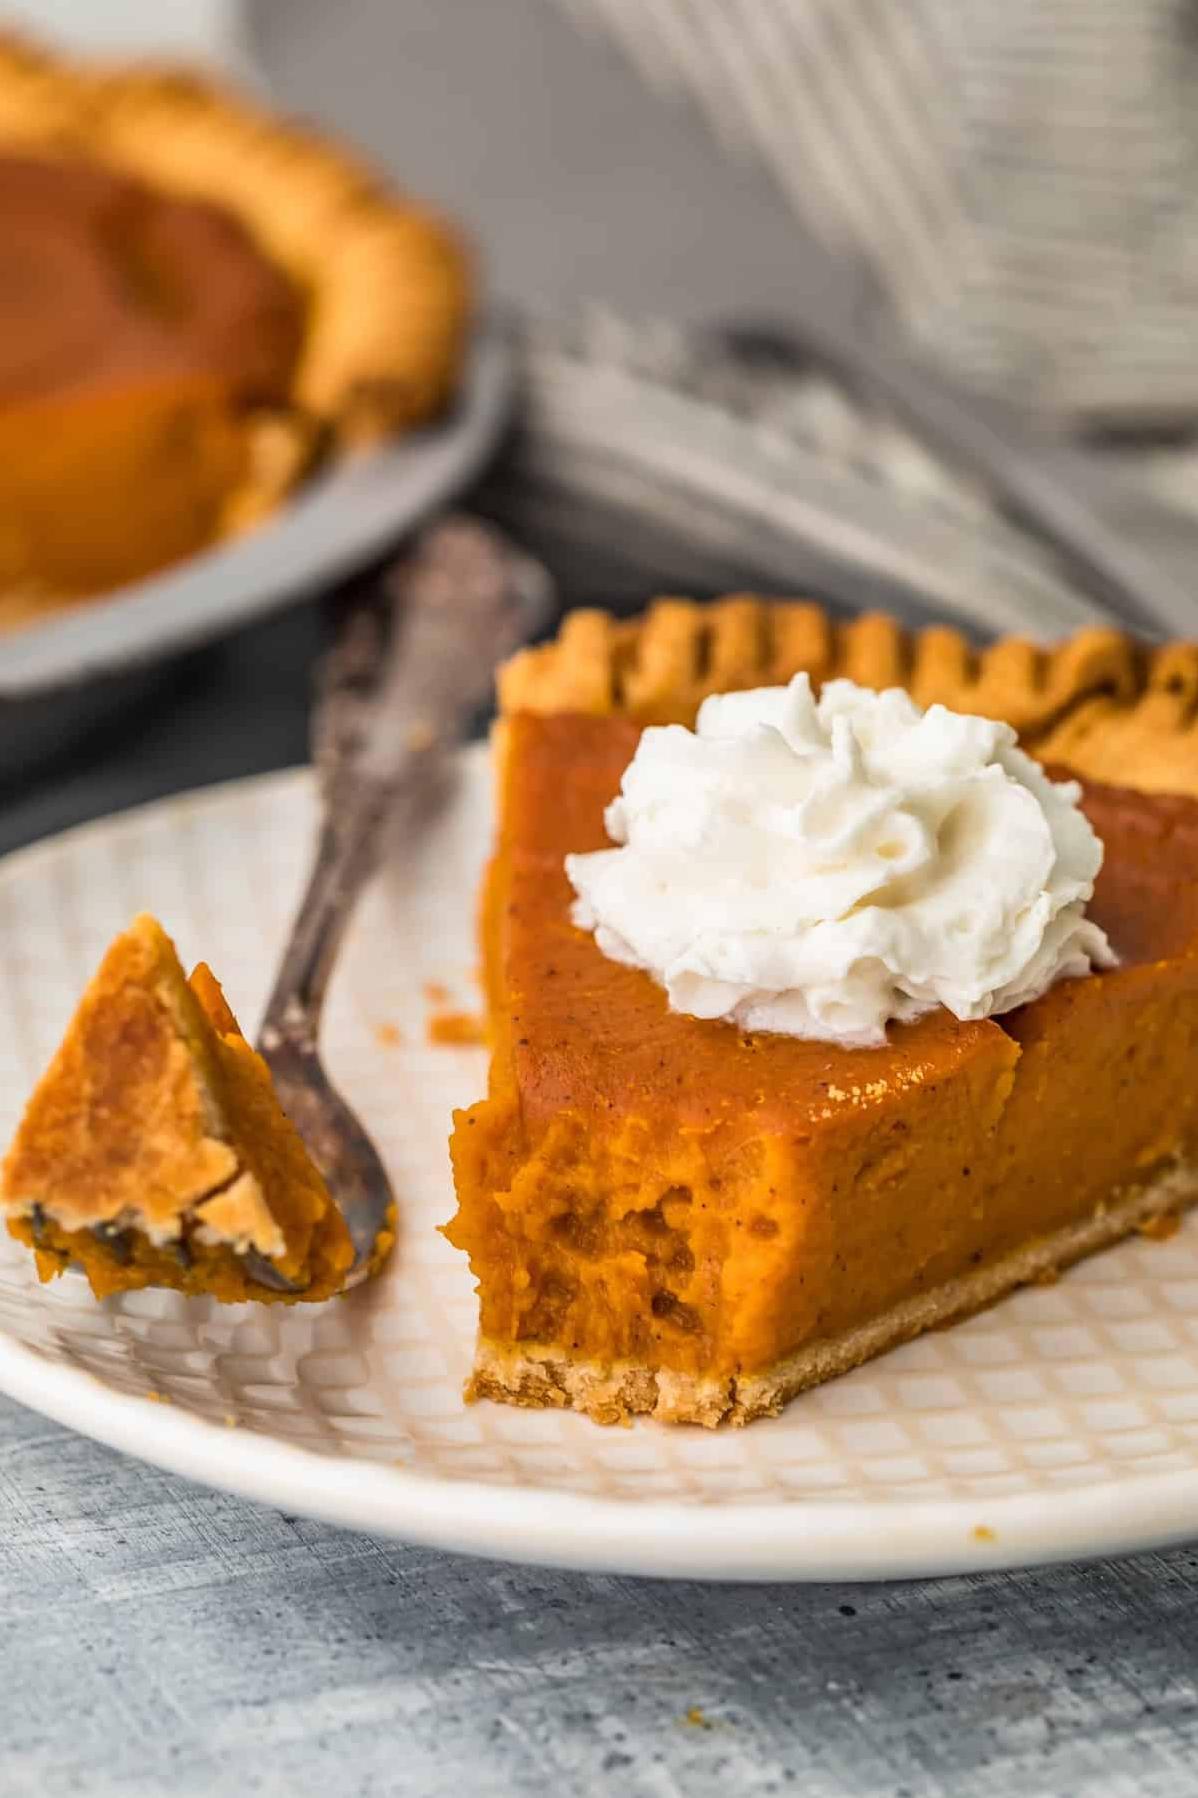  My pumpkin pie is perfect for those who want a healthy twist on a classic dessert.